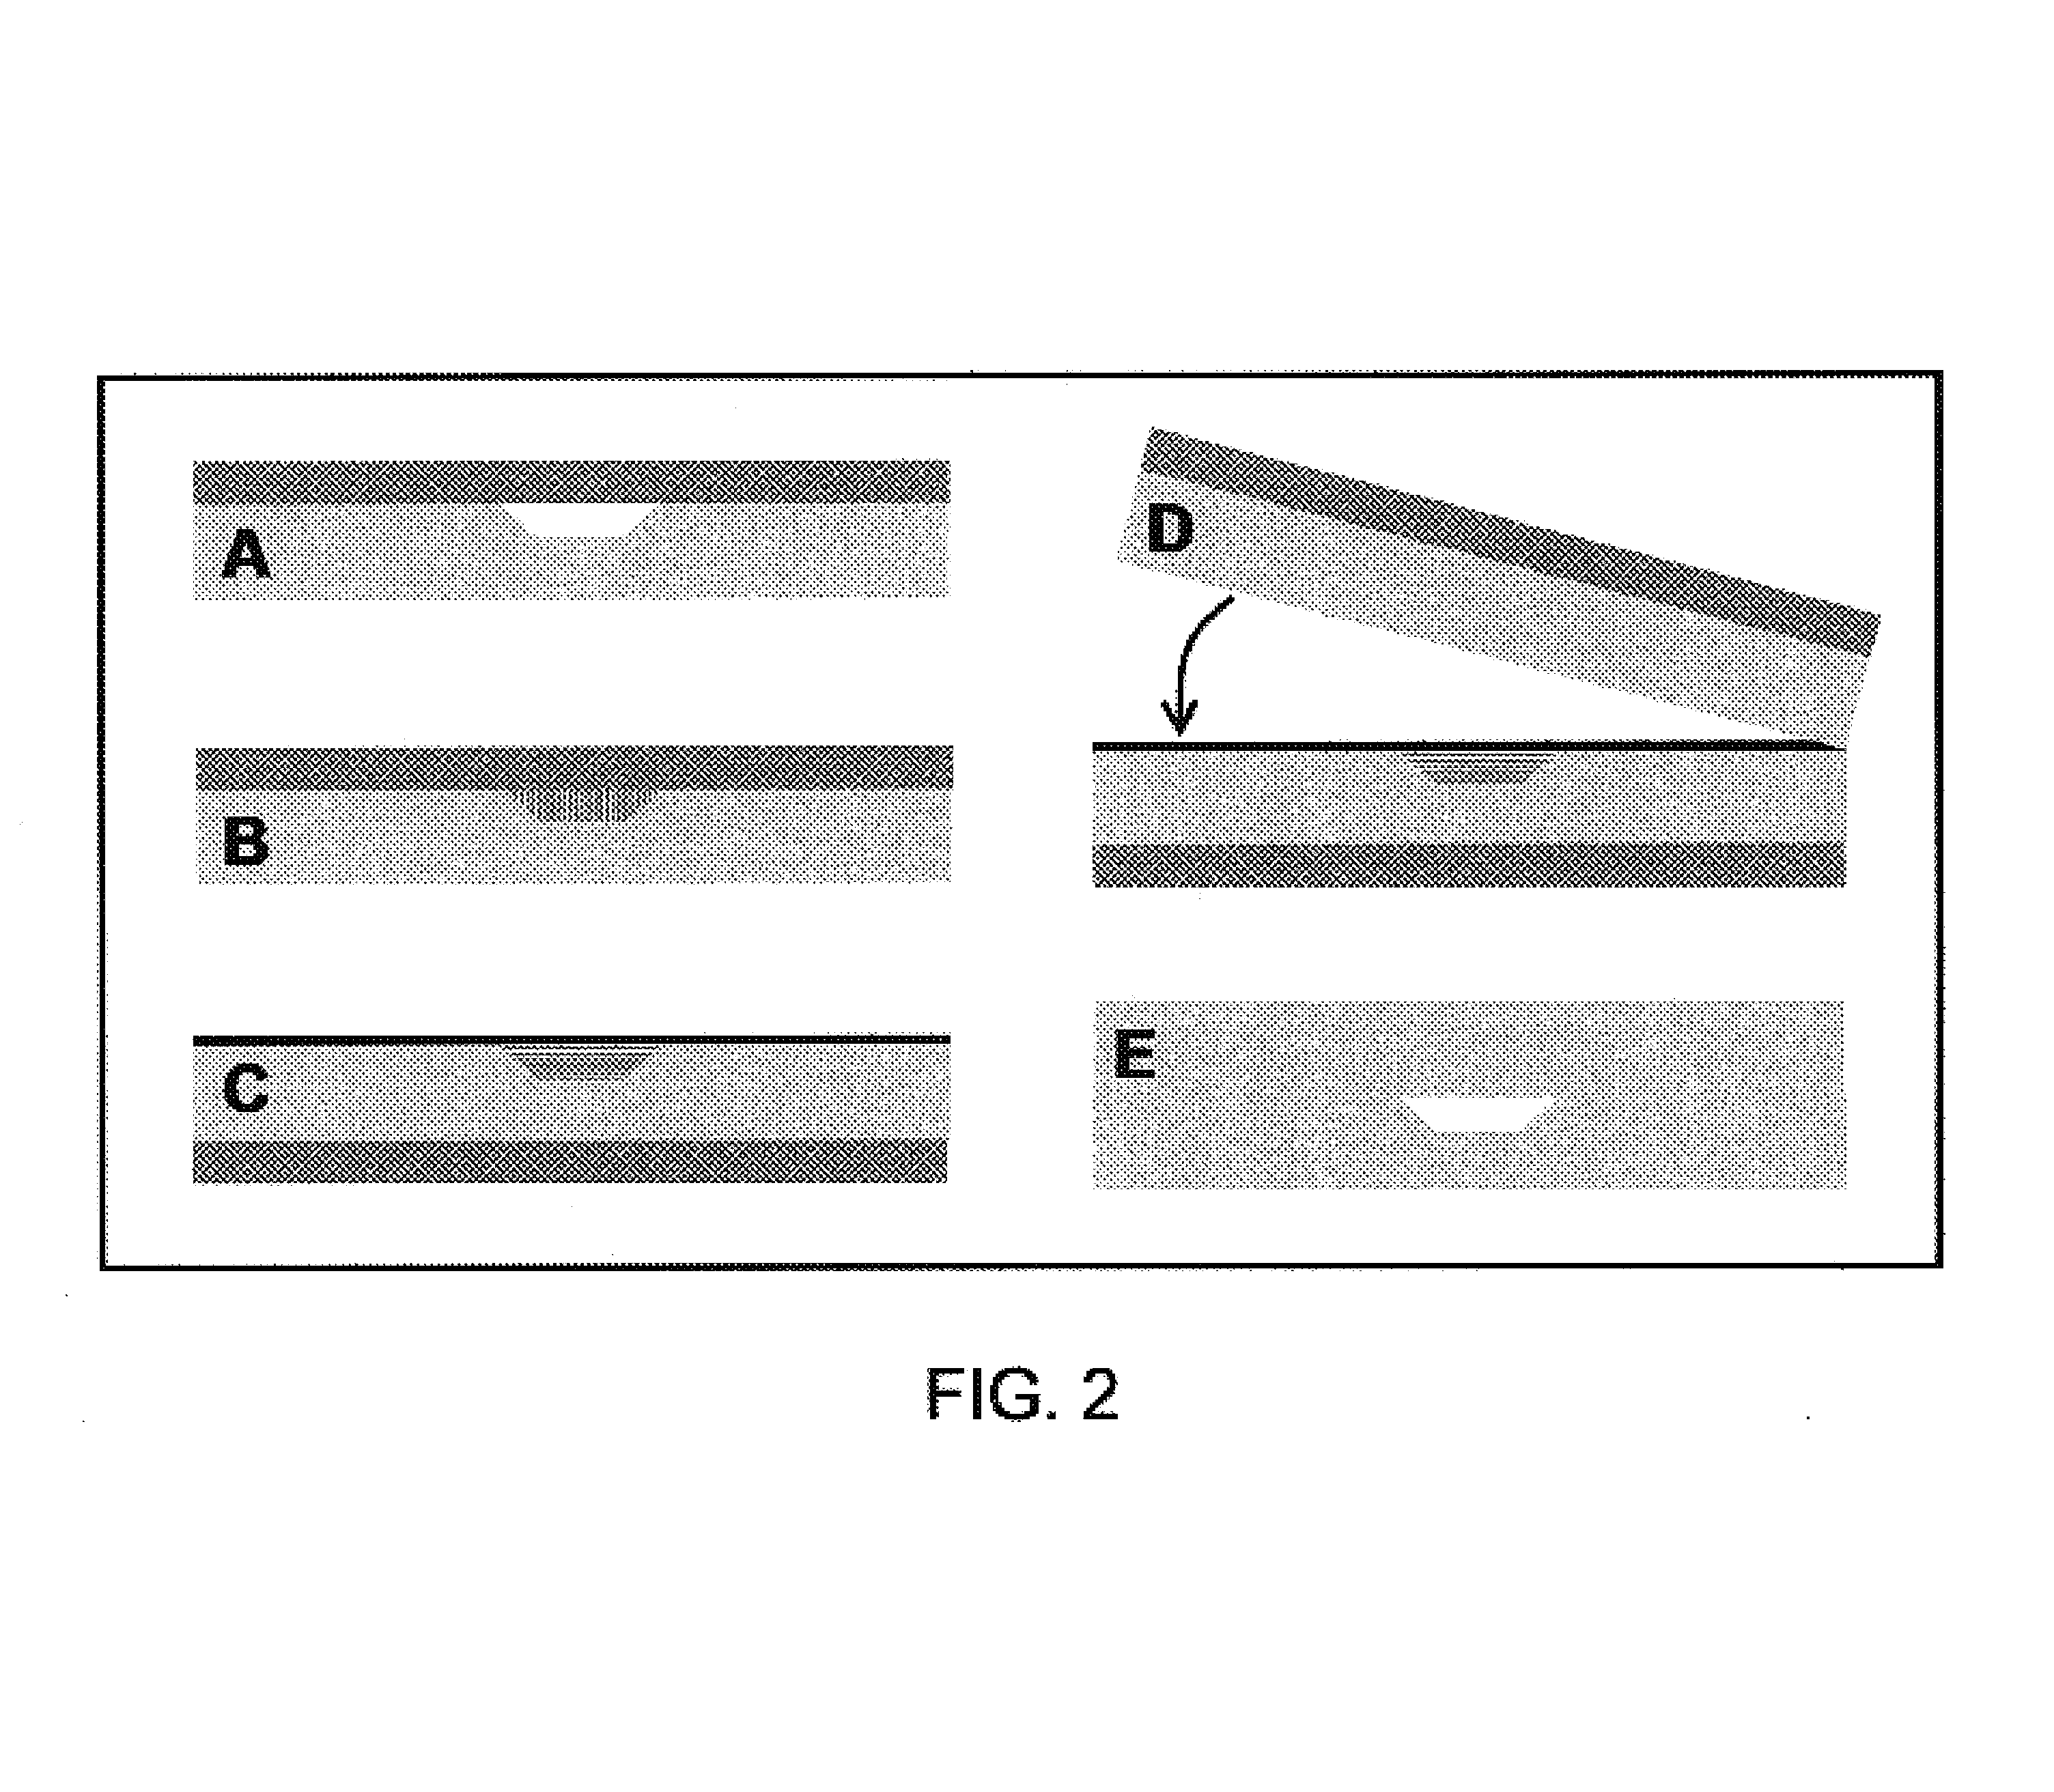 Phase-changing sacrificial materials for manufacture of high-performance polymeric capillary microchips